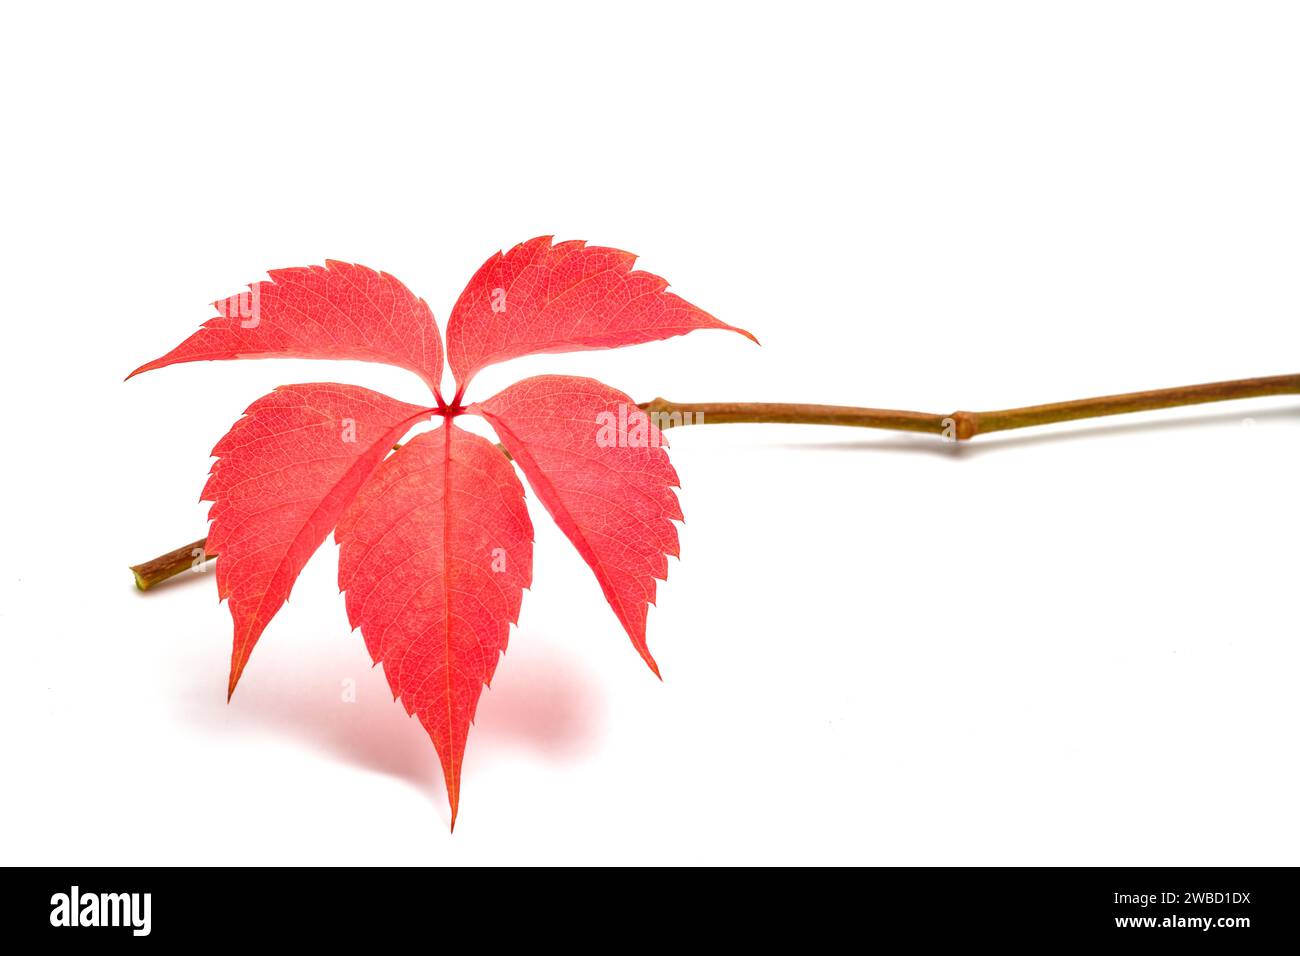 Red Virginia creeper leaf isolated on white background Stock Photo